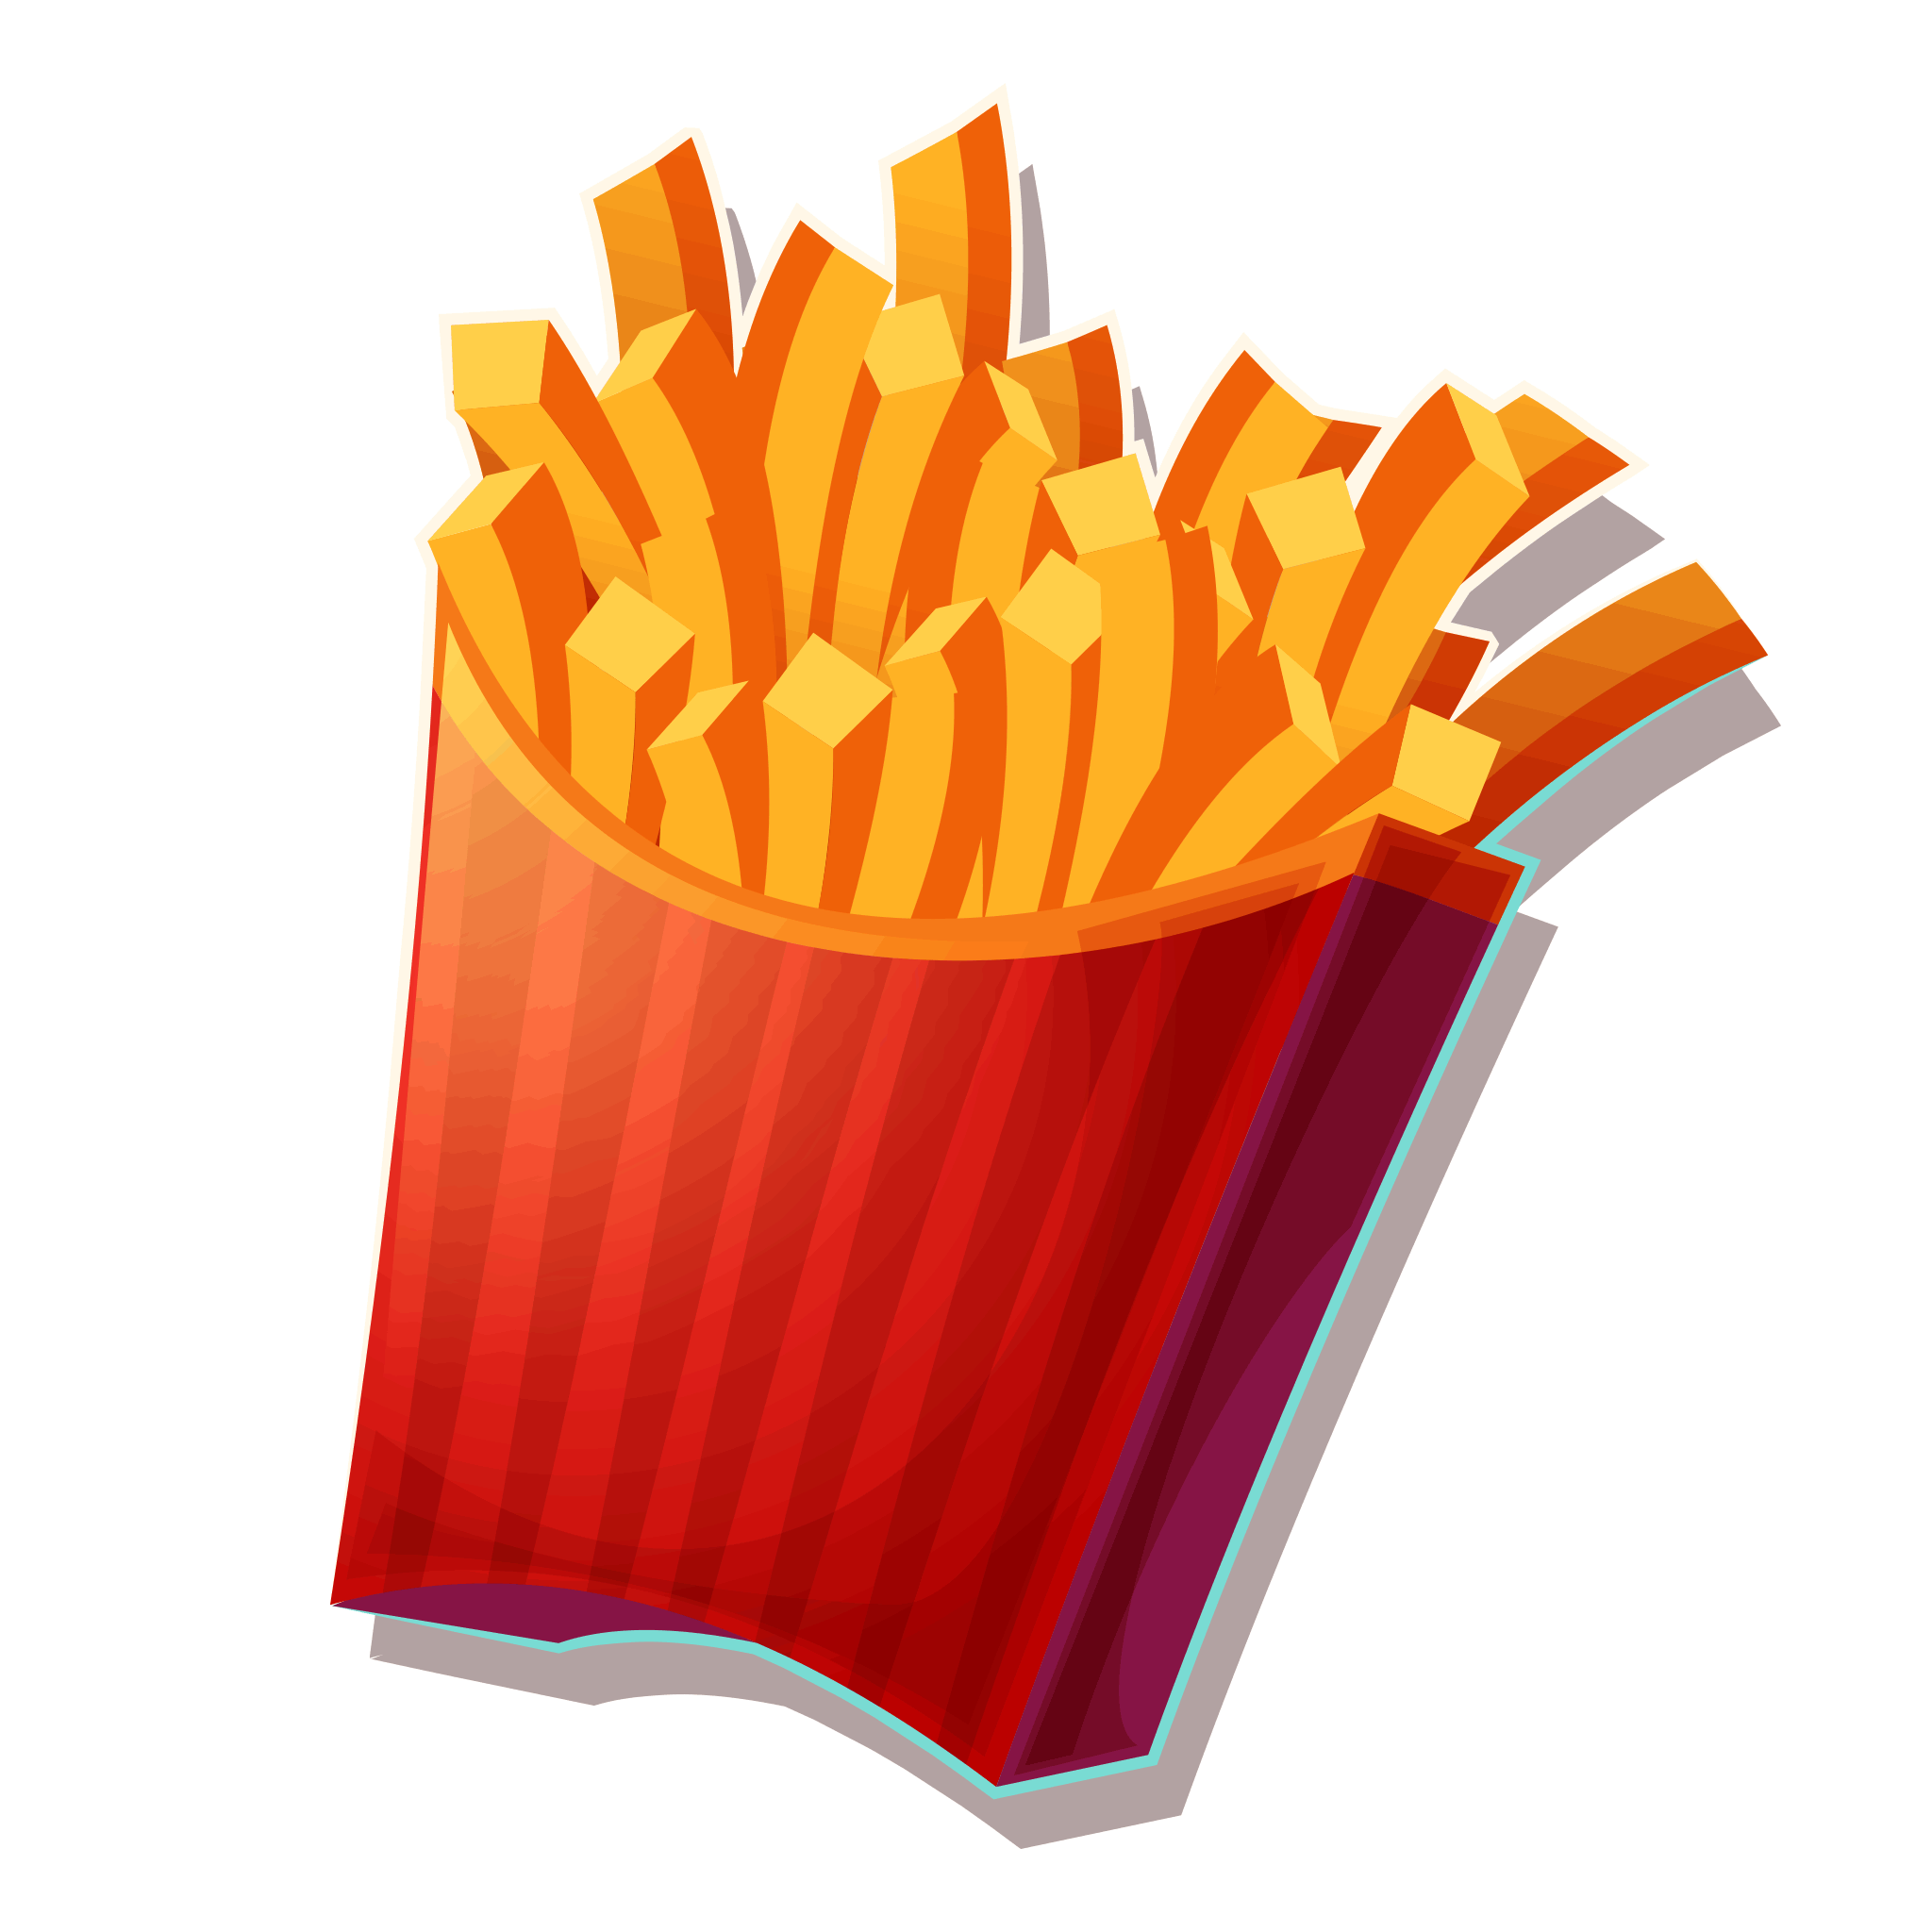 Fries French Potato Download Free Image PNG Image